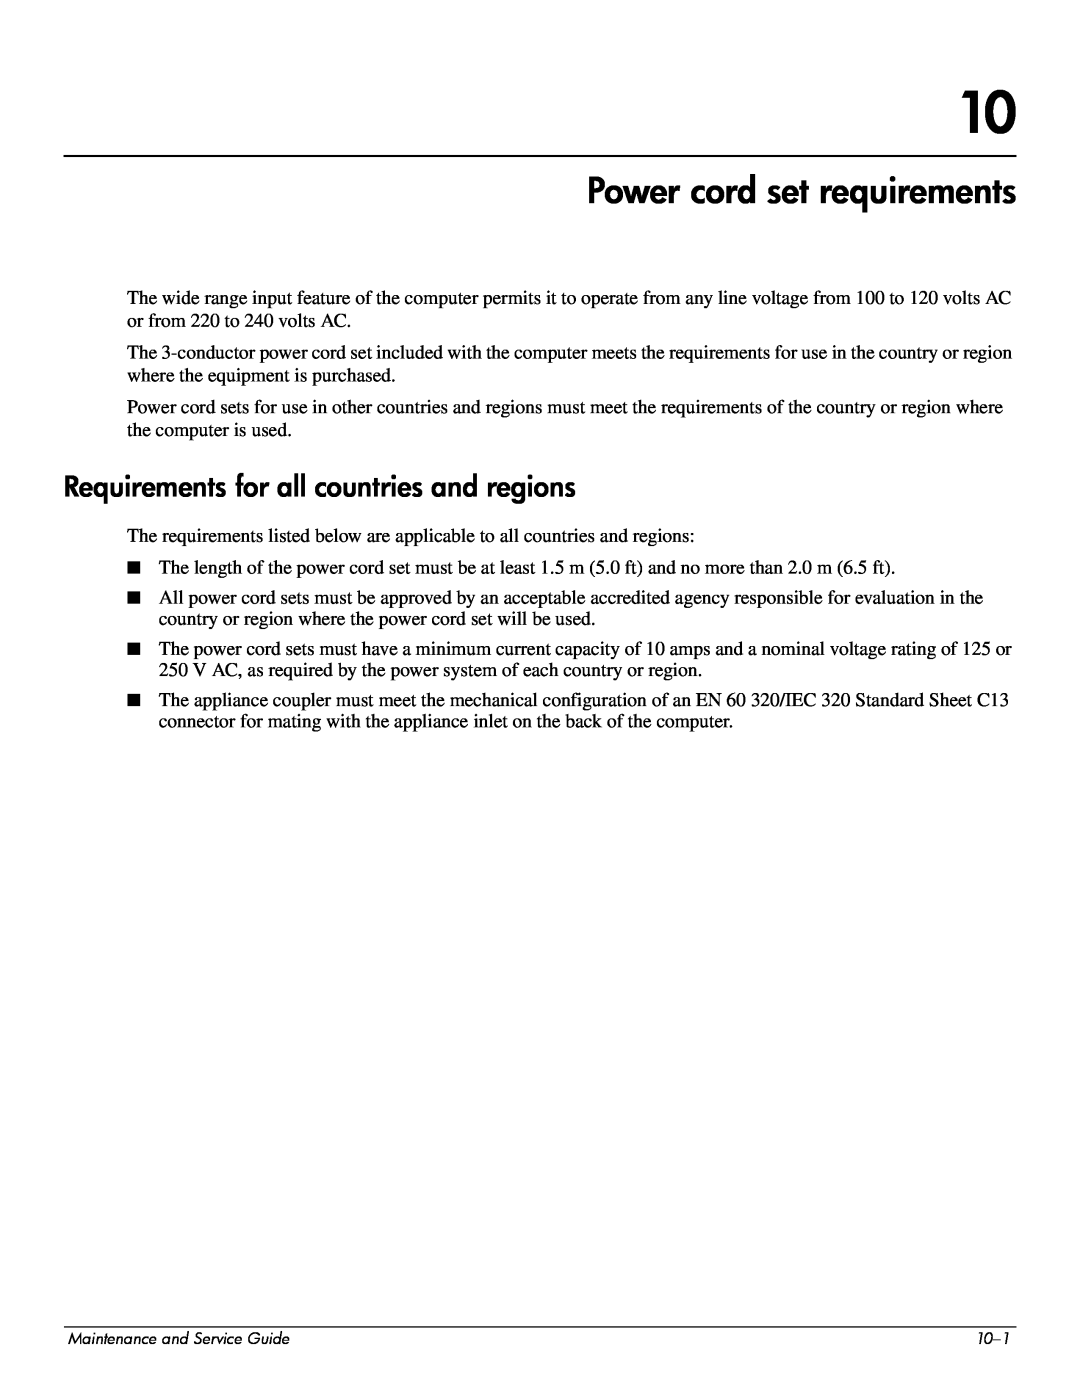 HP CQ41-207AX, CQ41-206AU, CQ41-205AX, CQ41-204AU Power cord set requirements, Requirements for all countries and regions 